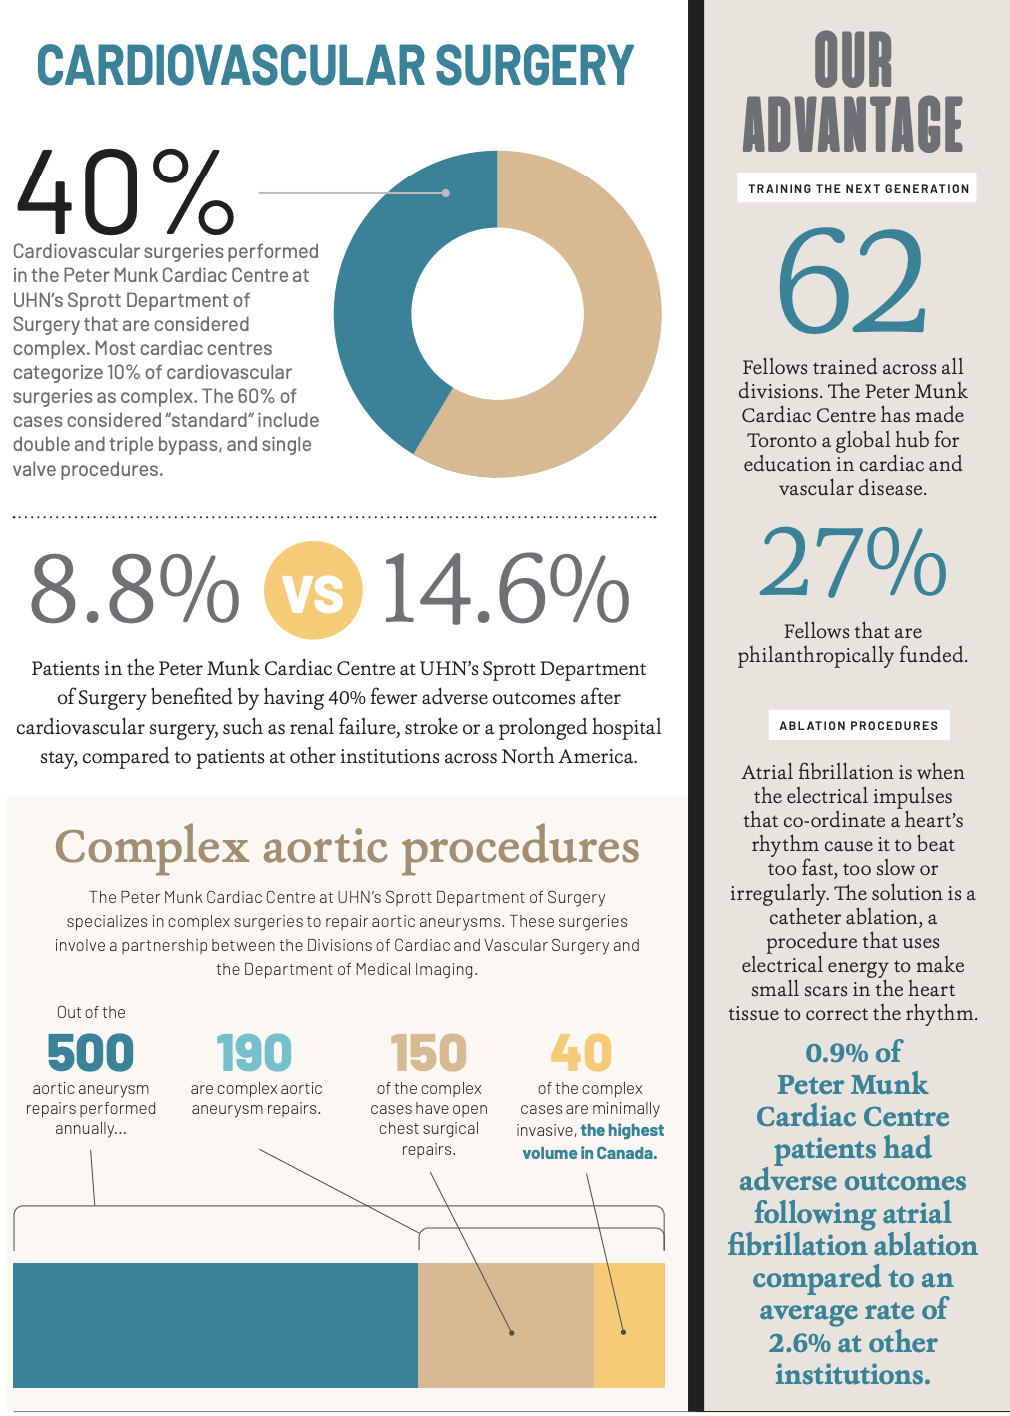 Infographic with information about the Cardiovascular surgery being performed at PMCC, along with the aortic procedures being done at PMCC, on the right hand side under the heading "Our Advantage" displays informations about training fellows, and ablation procedures.